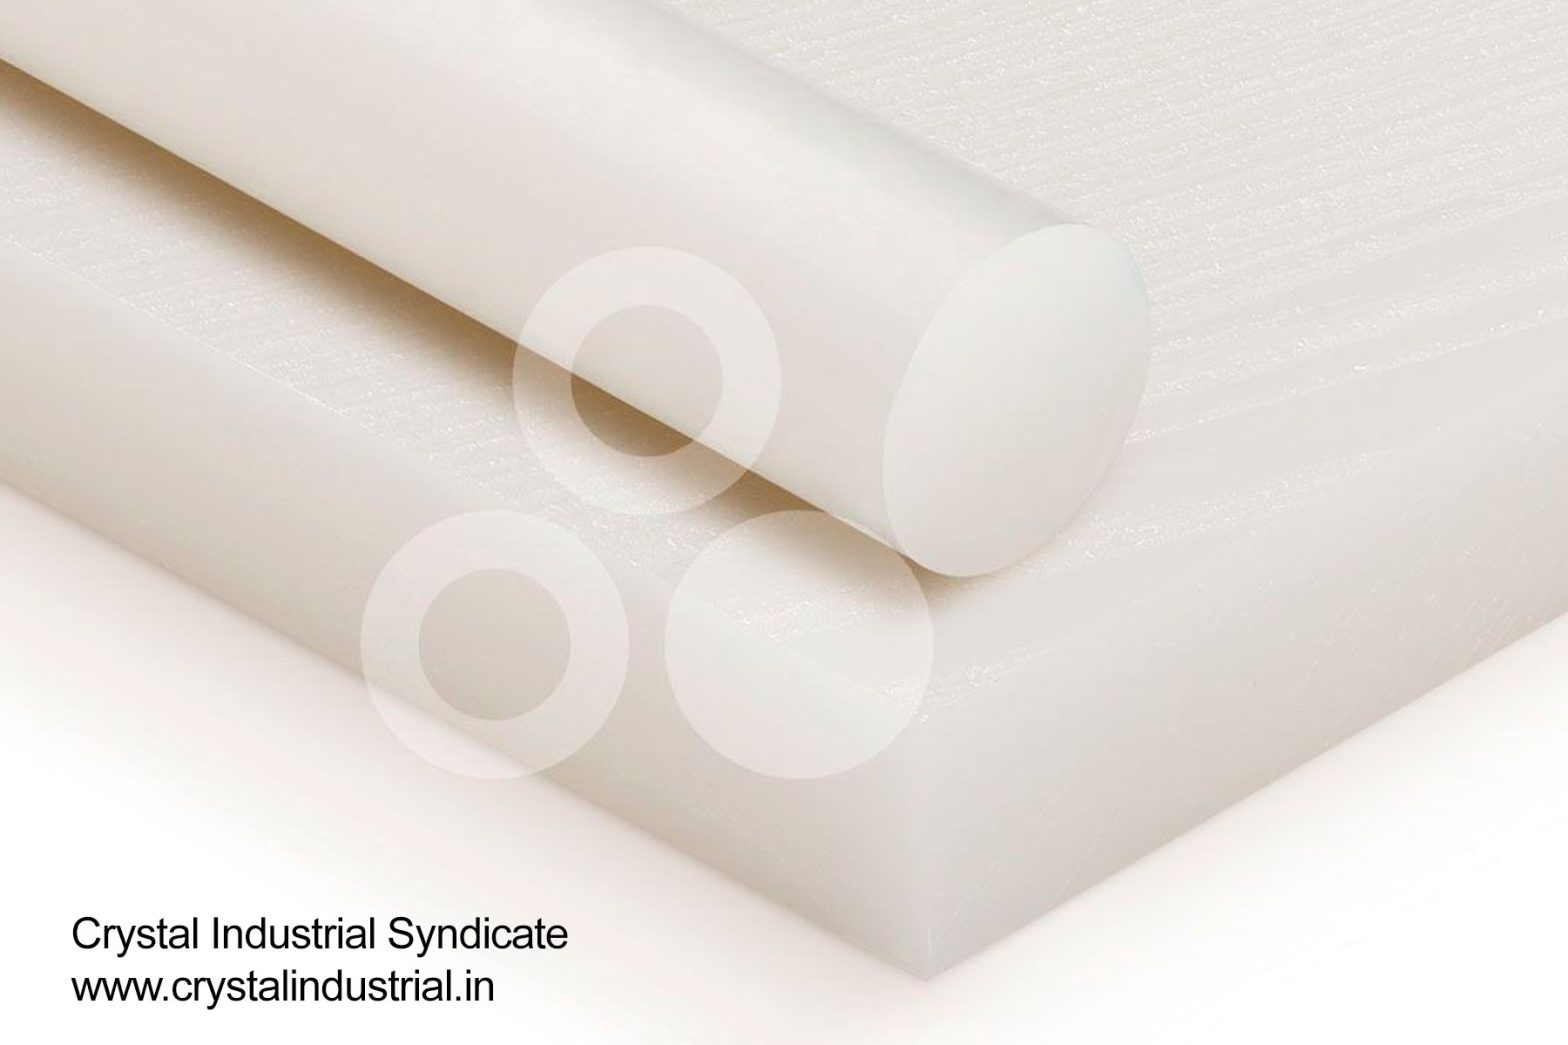 Advantages of Kynar-bodied injection quills